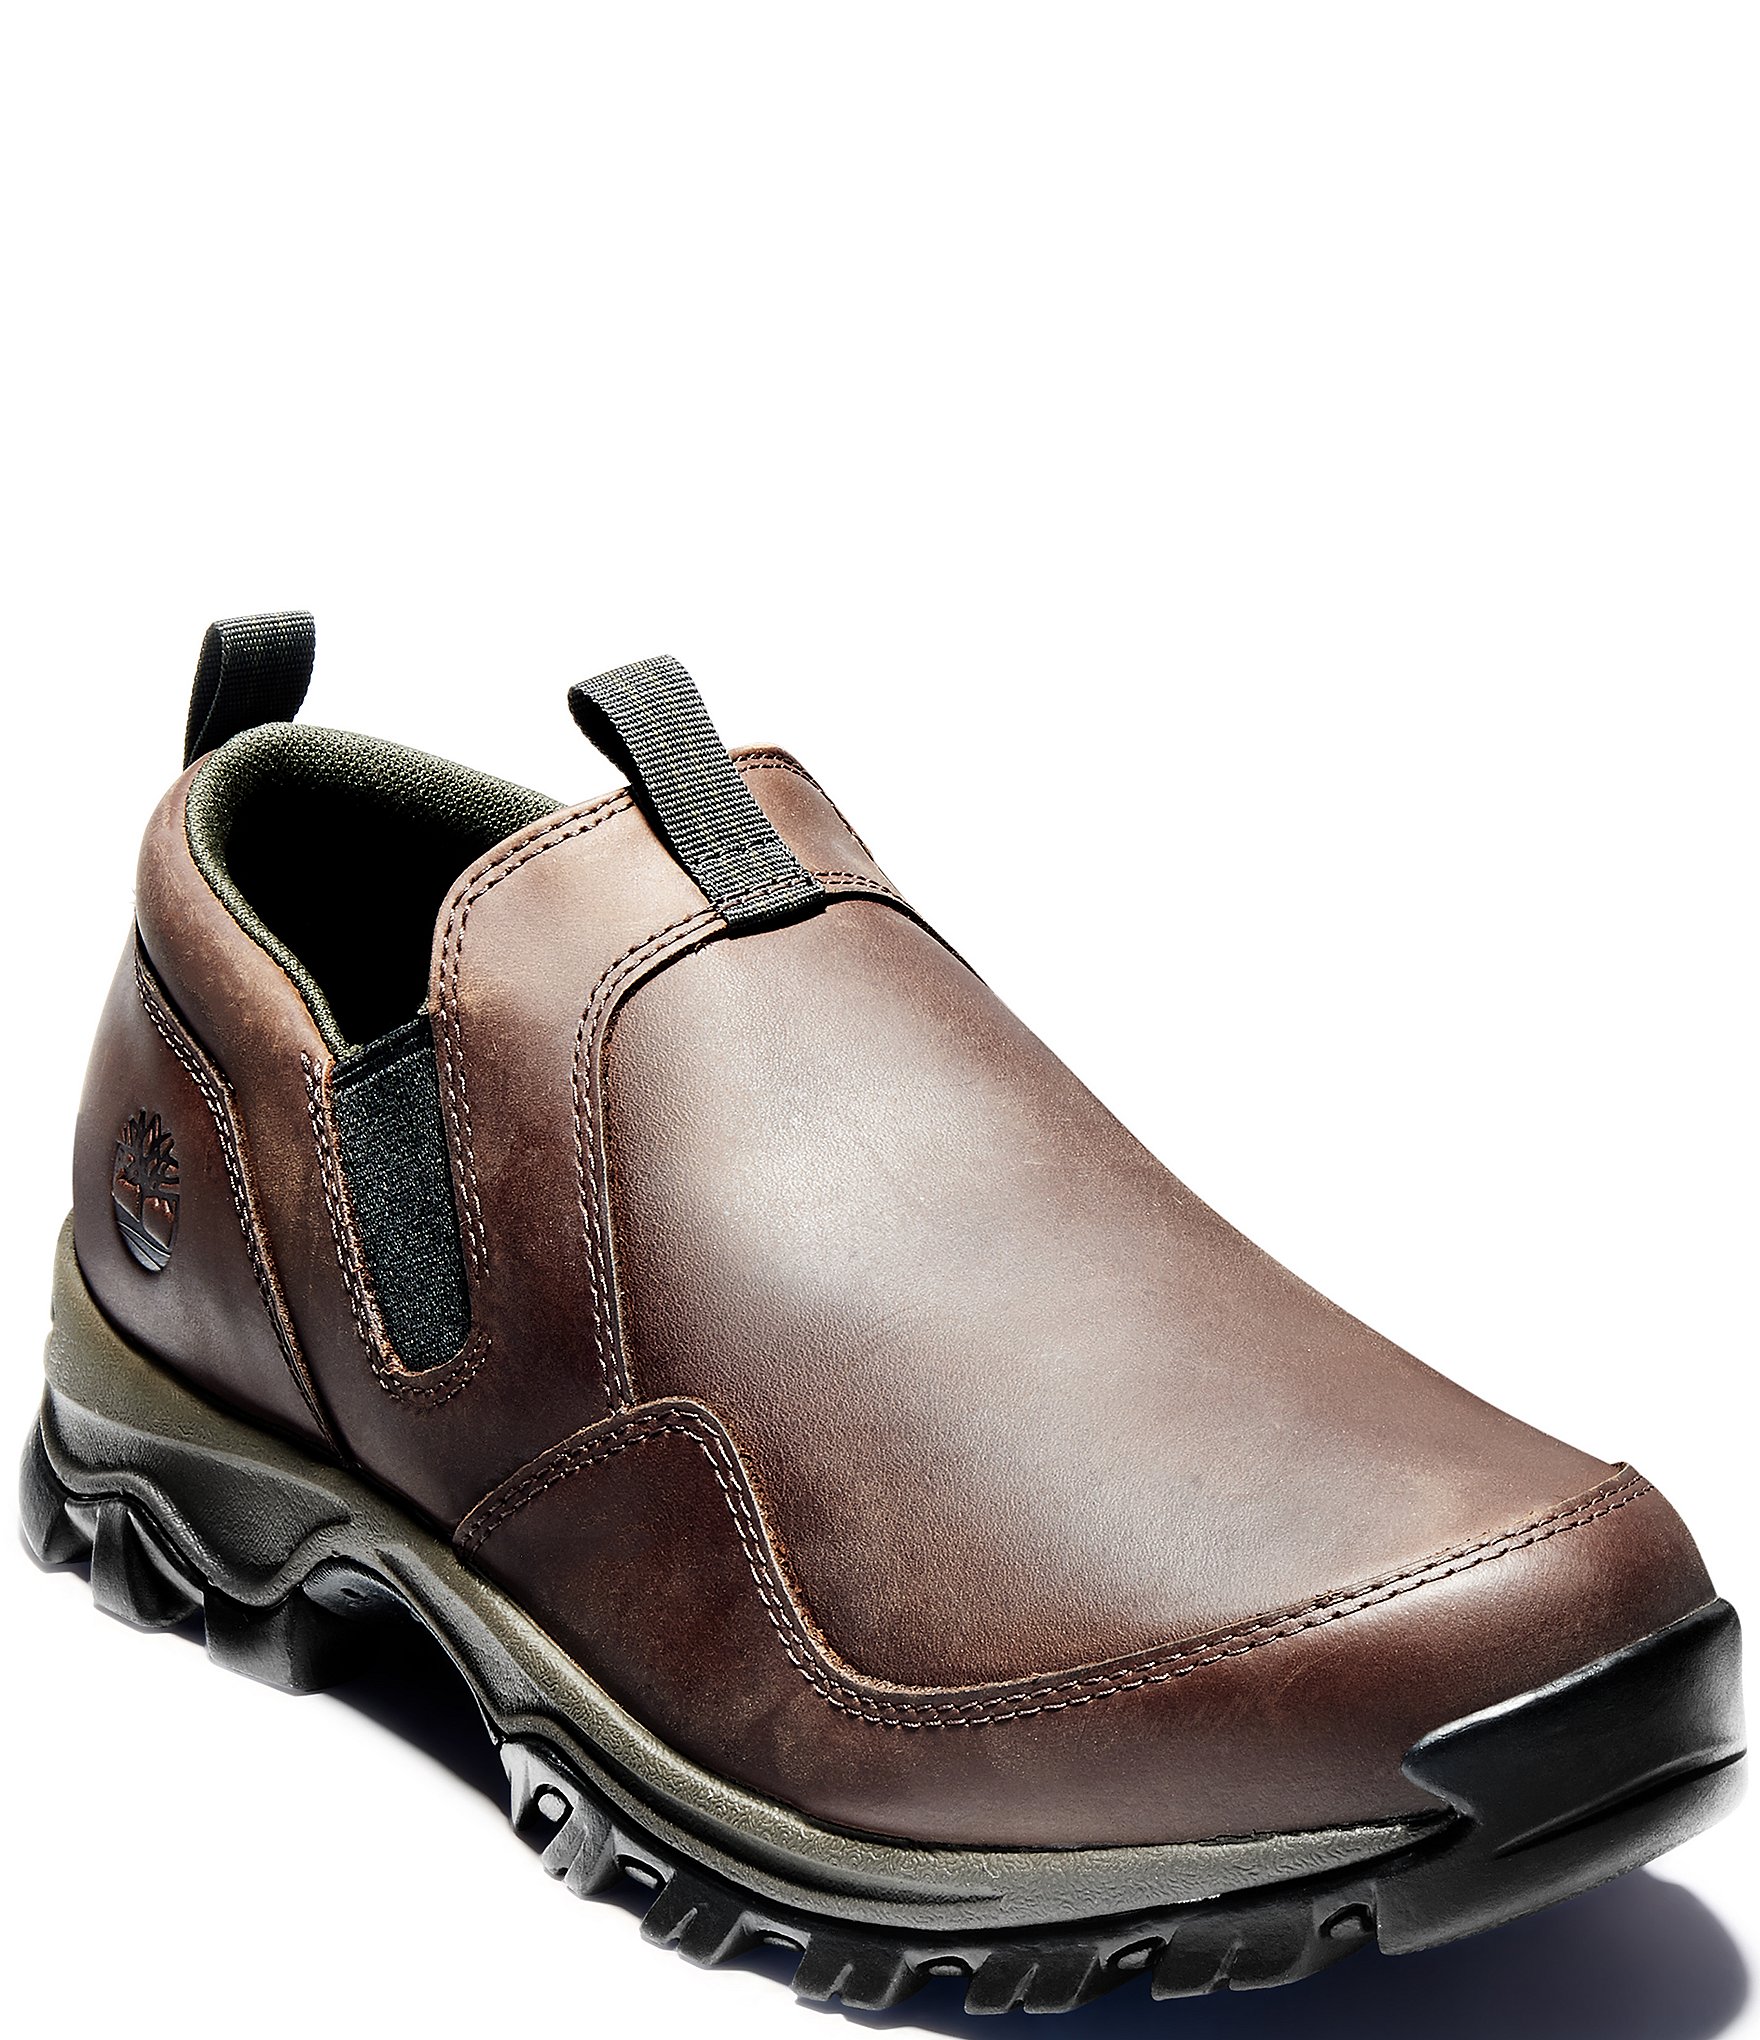 mens brown leather slip on shoes